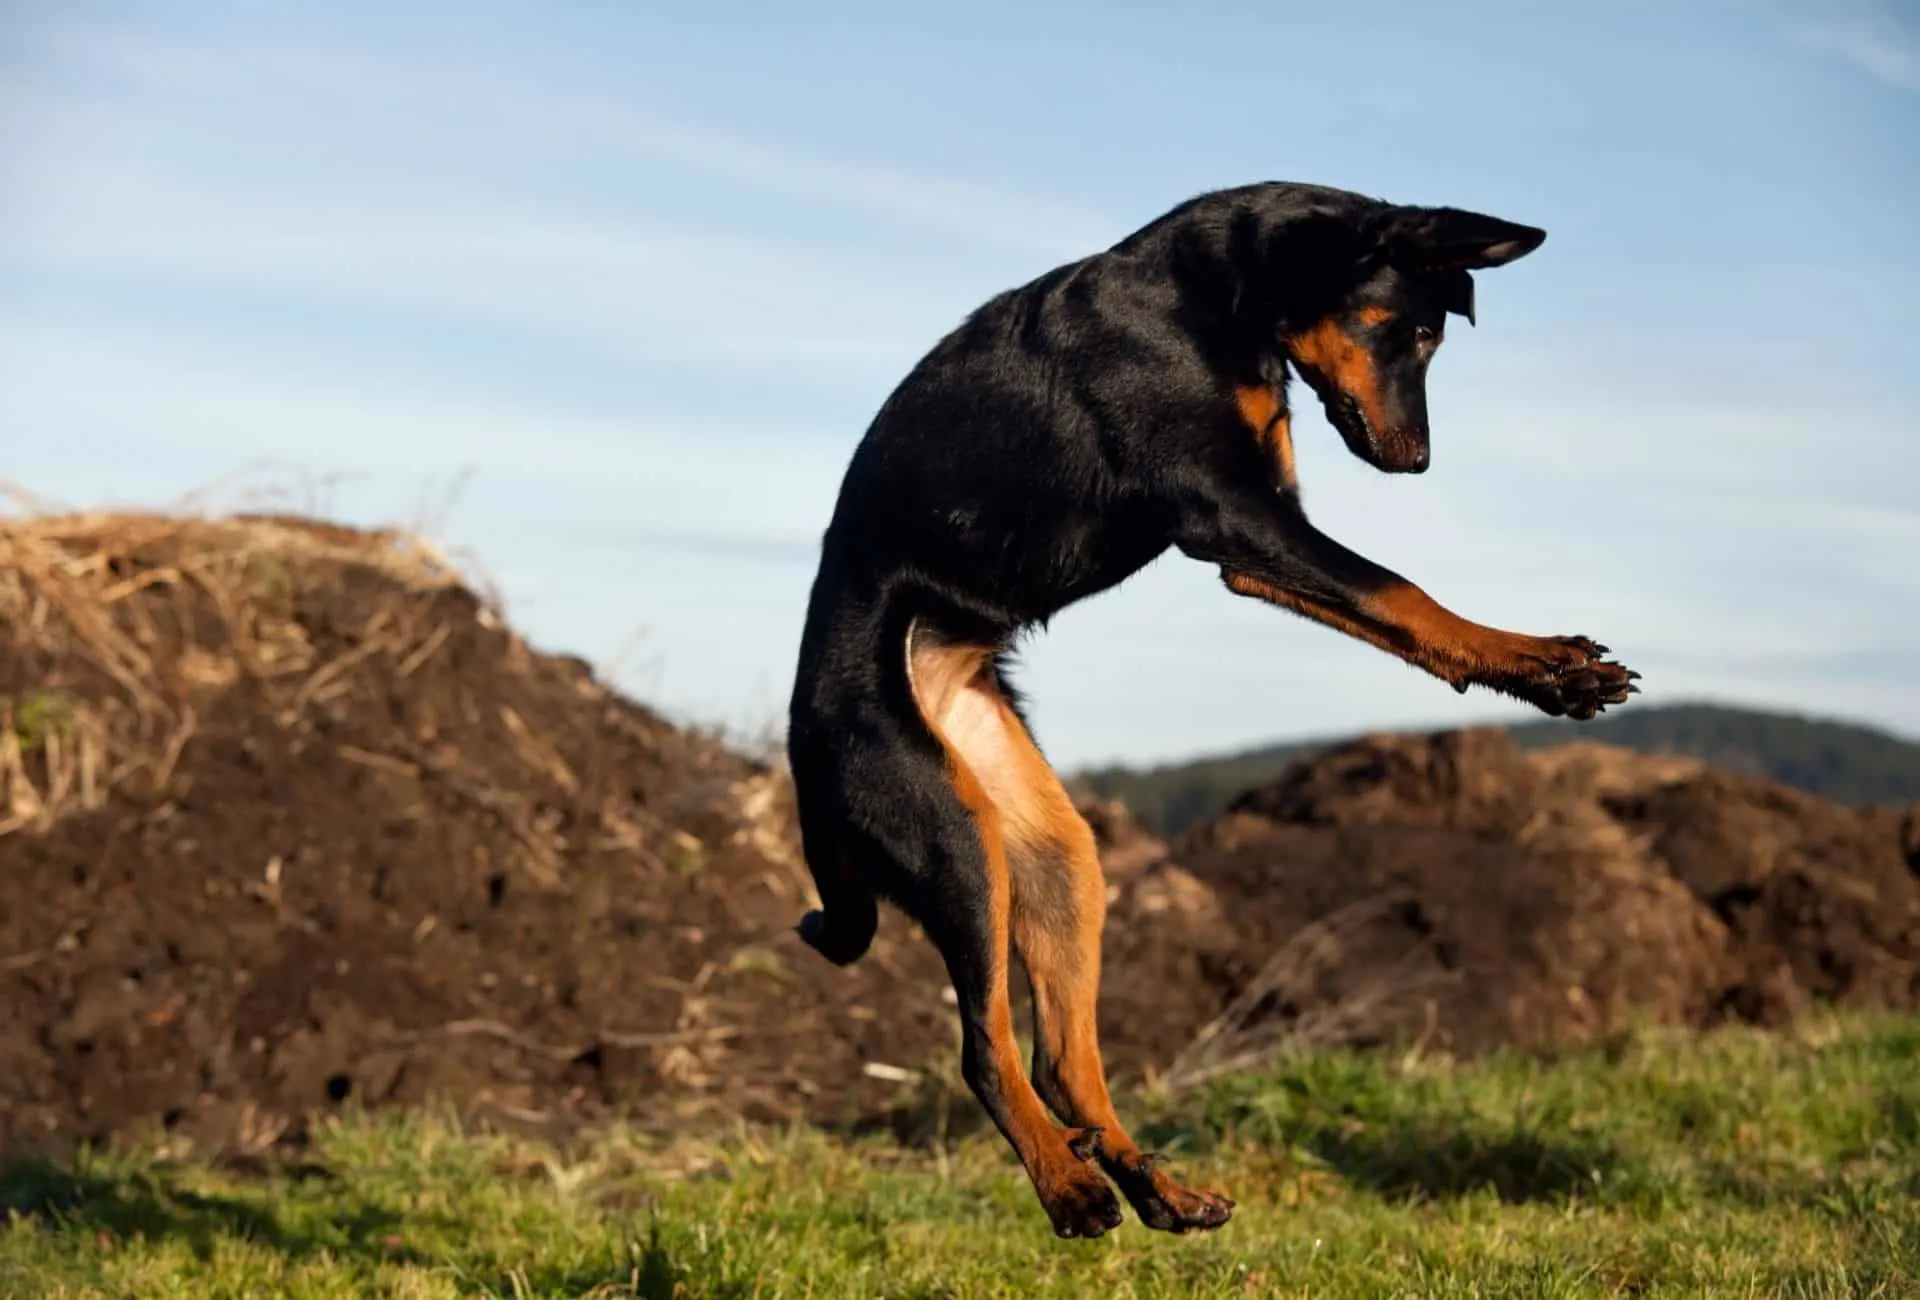 Beauceron jumping high in the air.